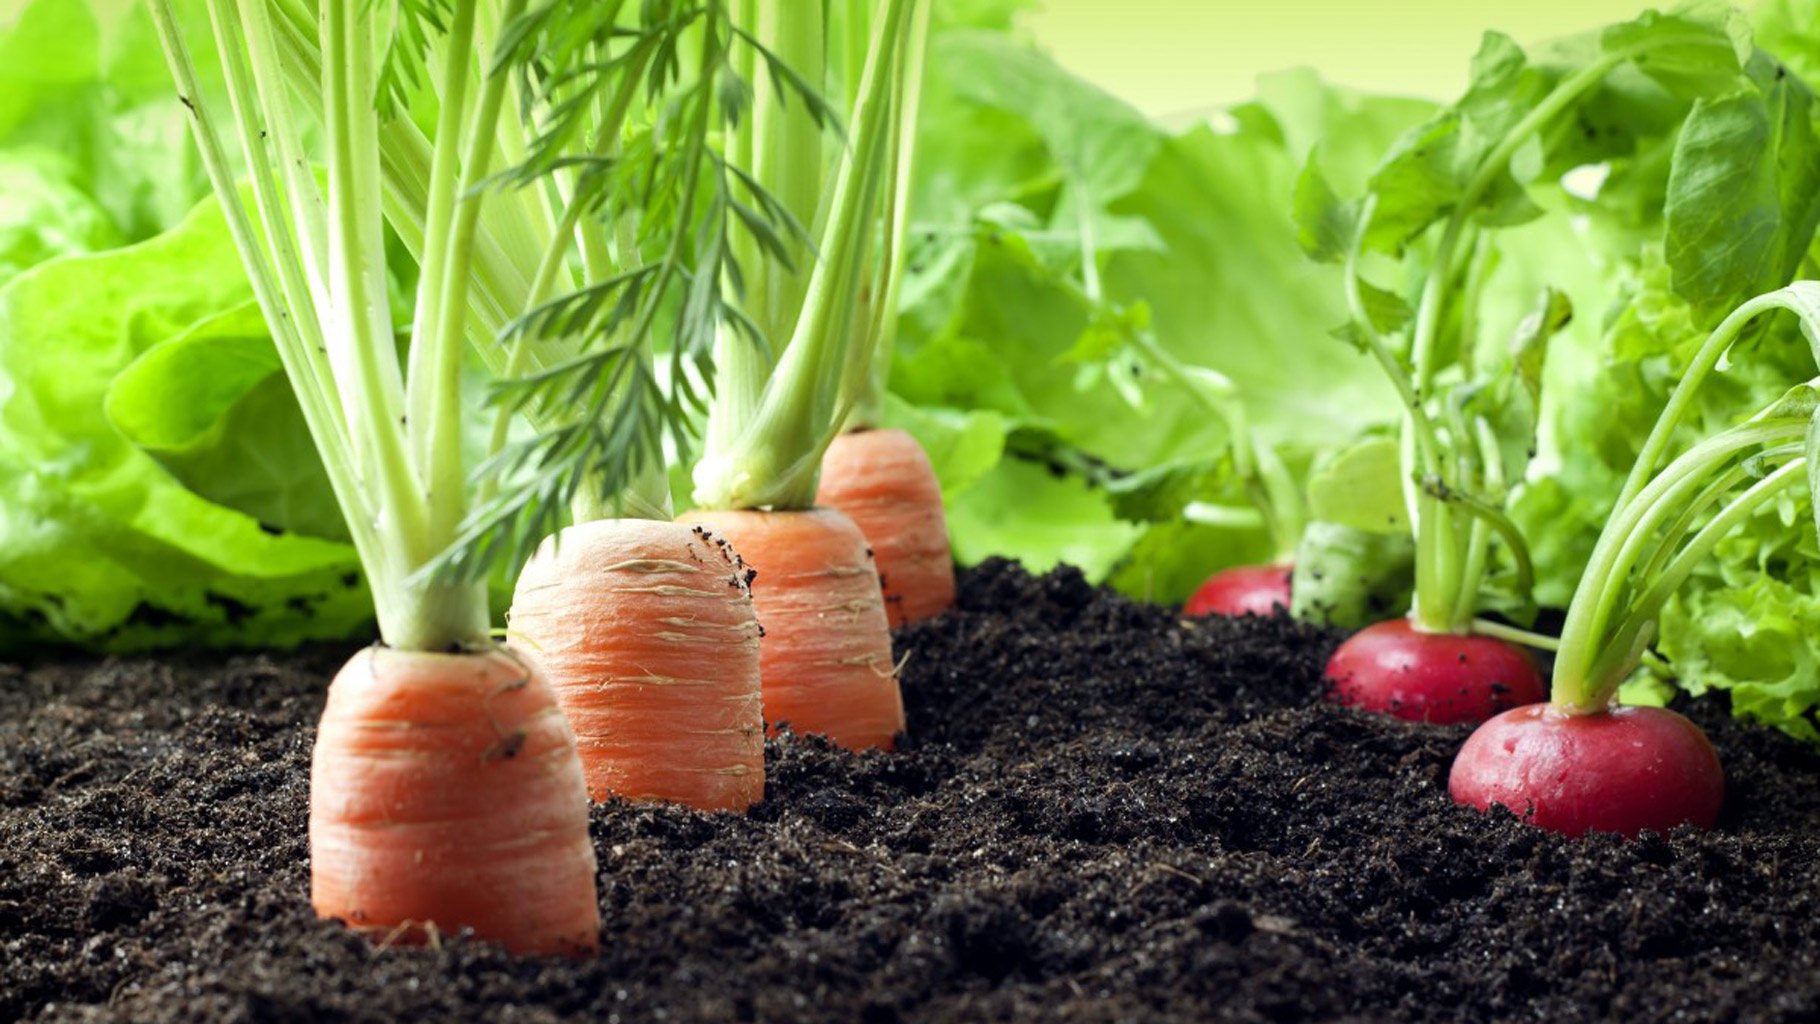 The-Organic-Farming-Trend-Is-Catching-One-Are-You-With-It